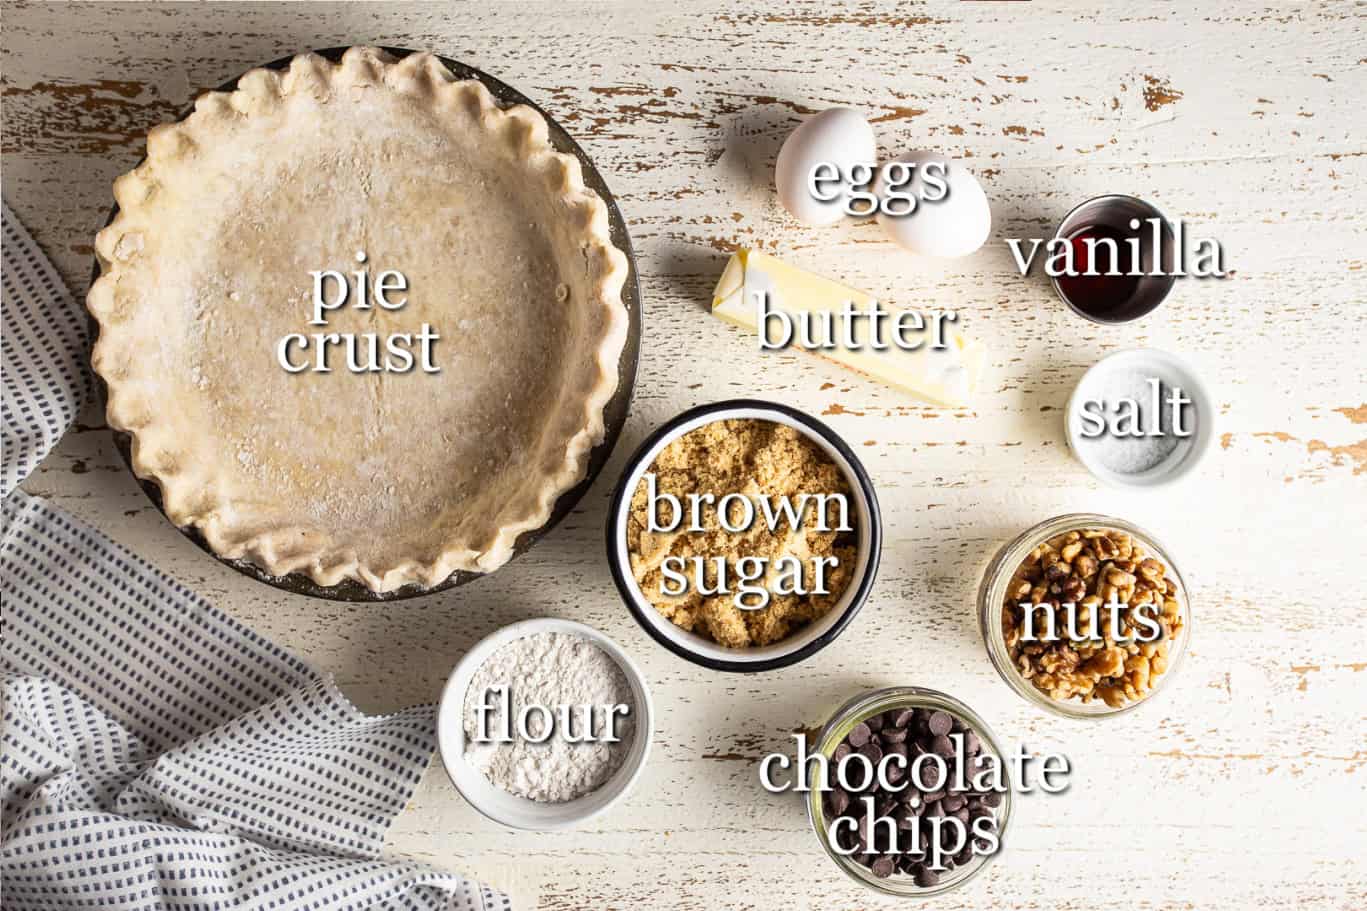 Ingredients for making derby pie, with text labels.